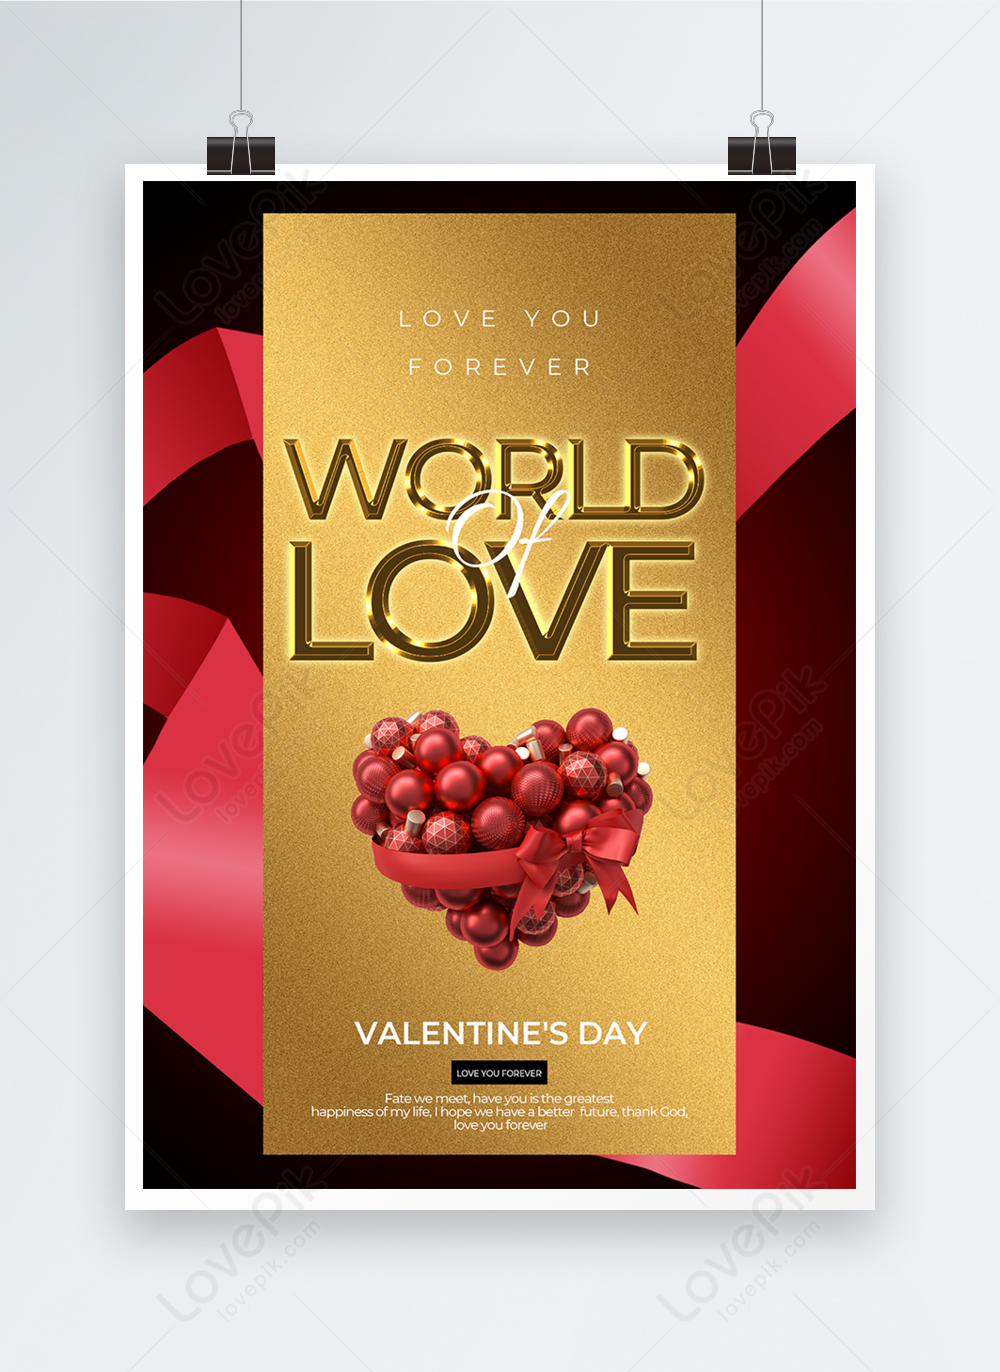 golden-creative-valentines-day-event-poster-template-image-picture-free